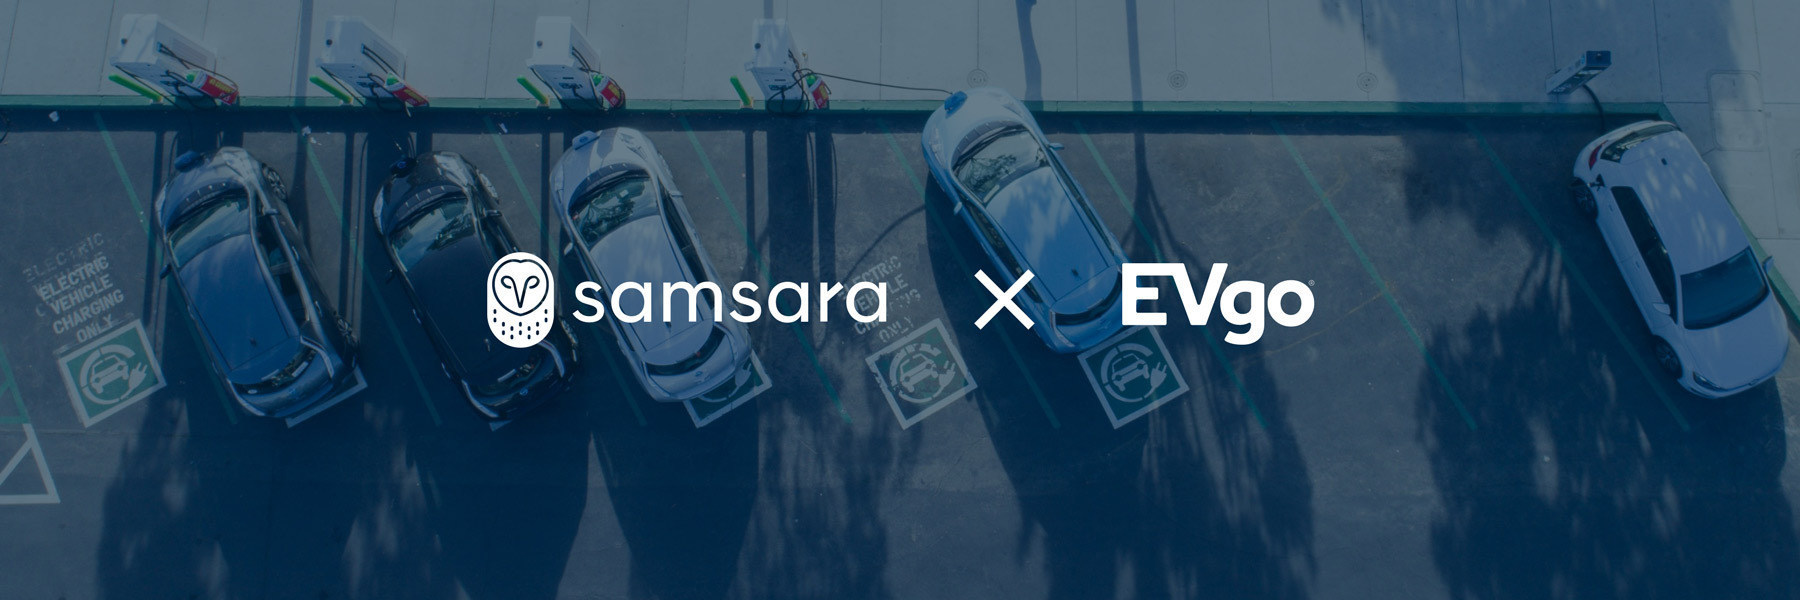 Samsara partners with EVgo to accelerate the transition to electric vehicles